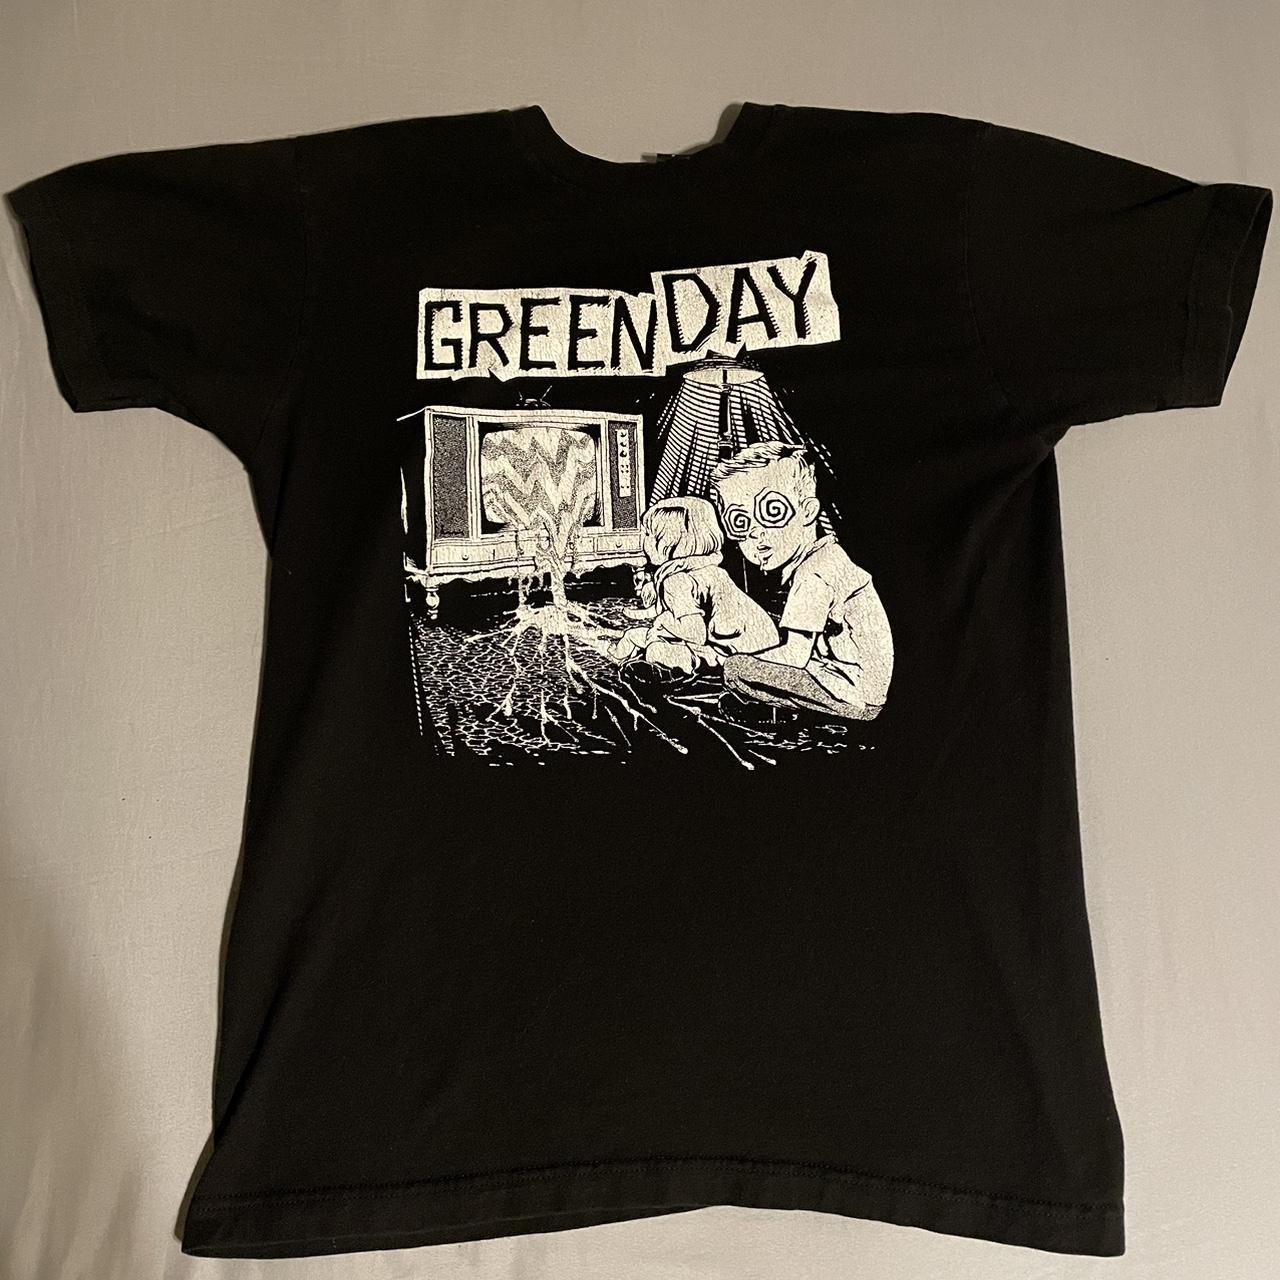 GREEN DAY T-SHIRT NEW FROM HOT TOPIC Medium black